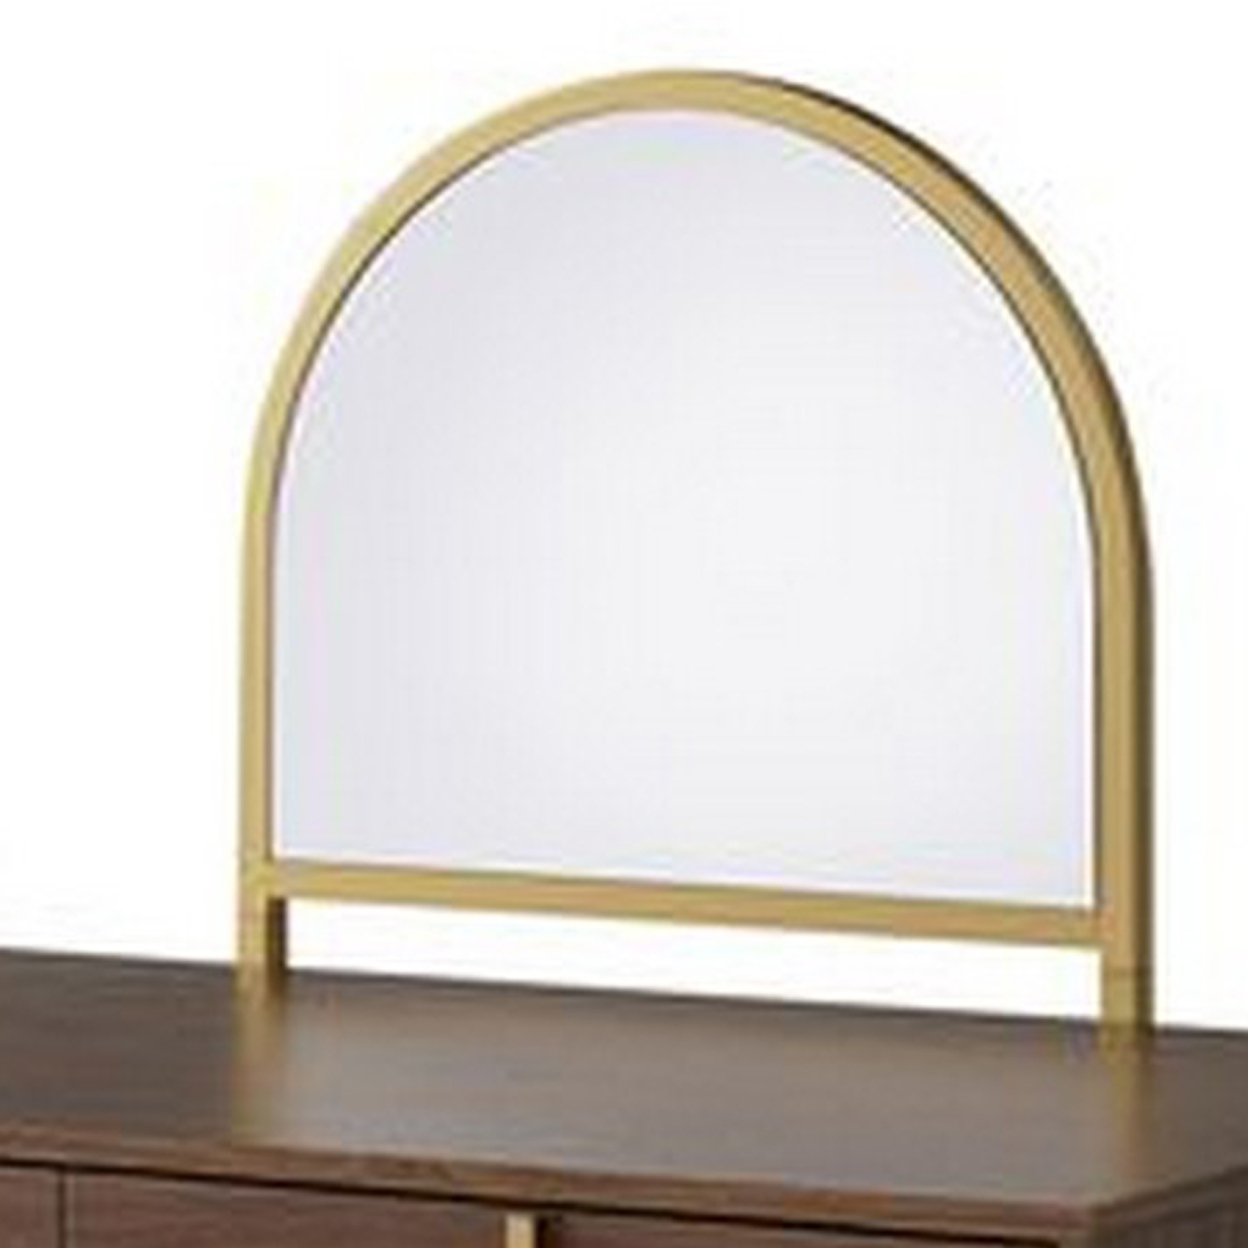 Vanity Desk With Mirror And Open Metal Frame, Brown And Gold- Saltoro Sherpi